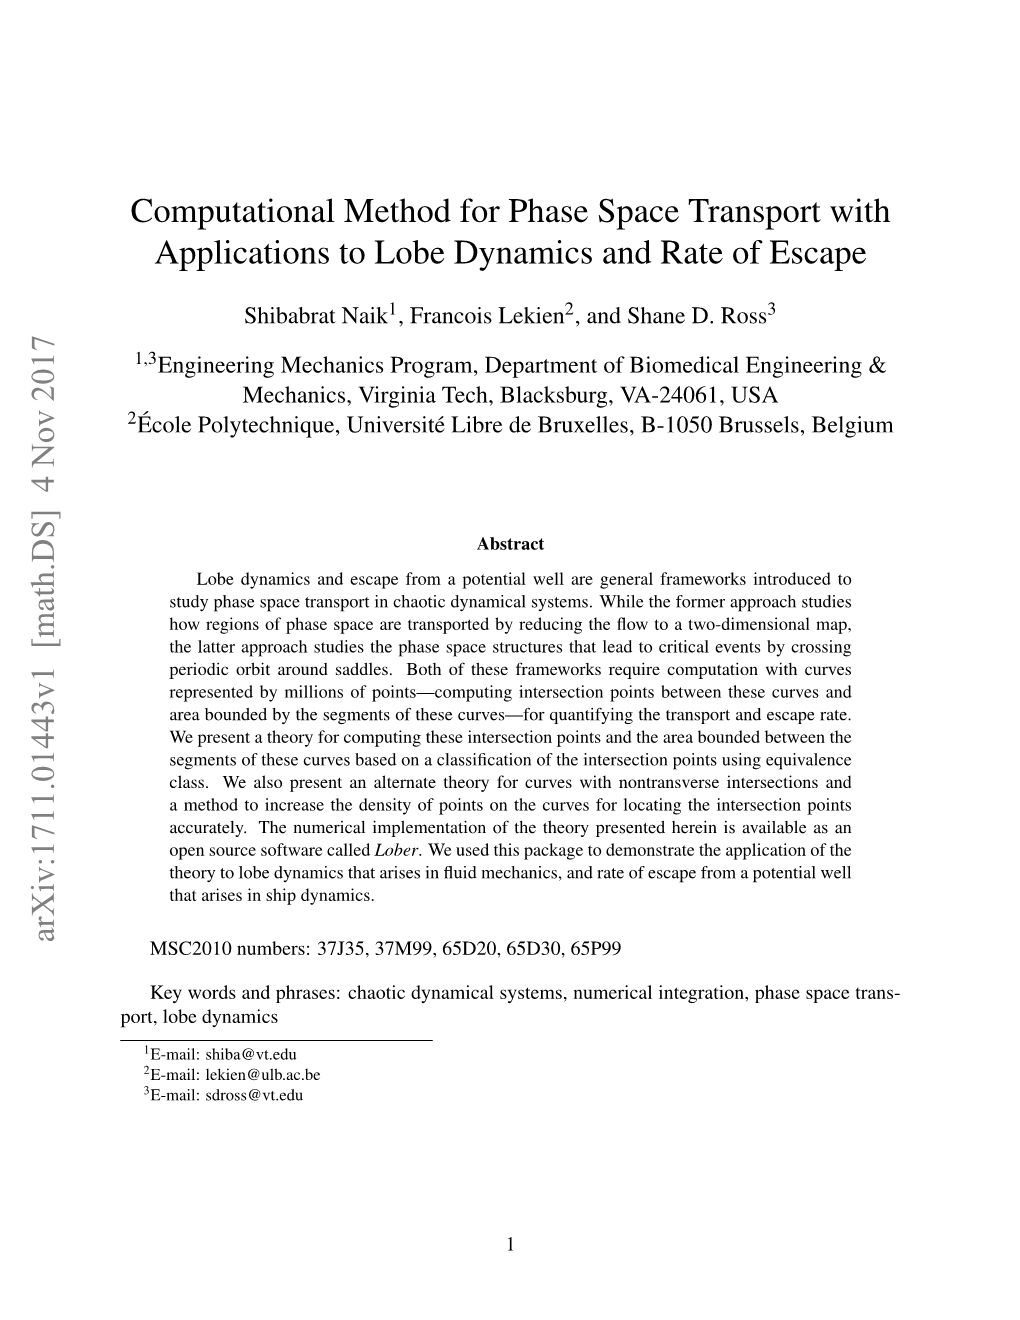 Computational Method for Phase Space Transport with Applications to Lobe Dynamics and Rate of Escape